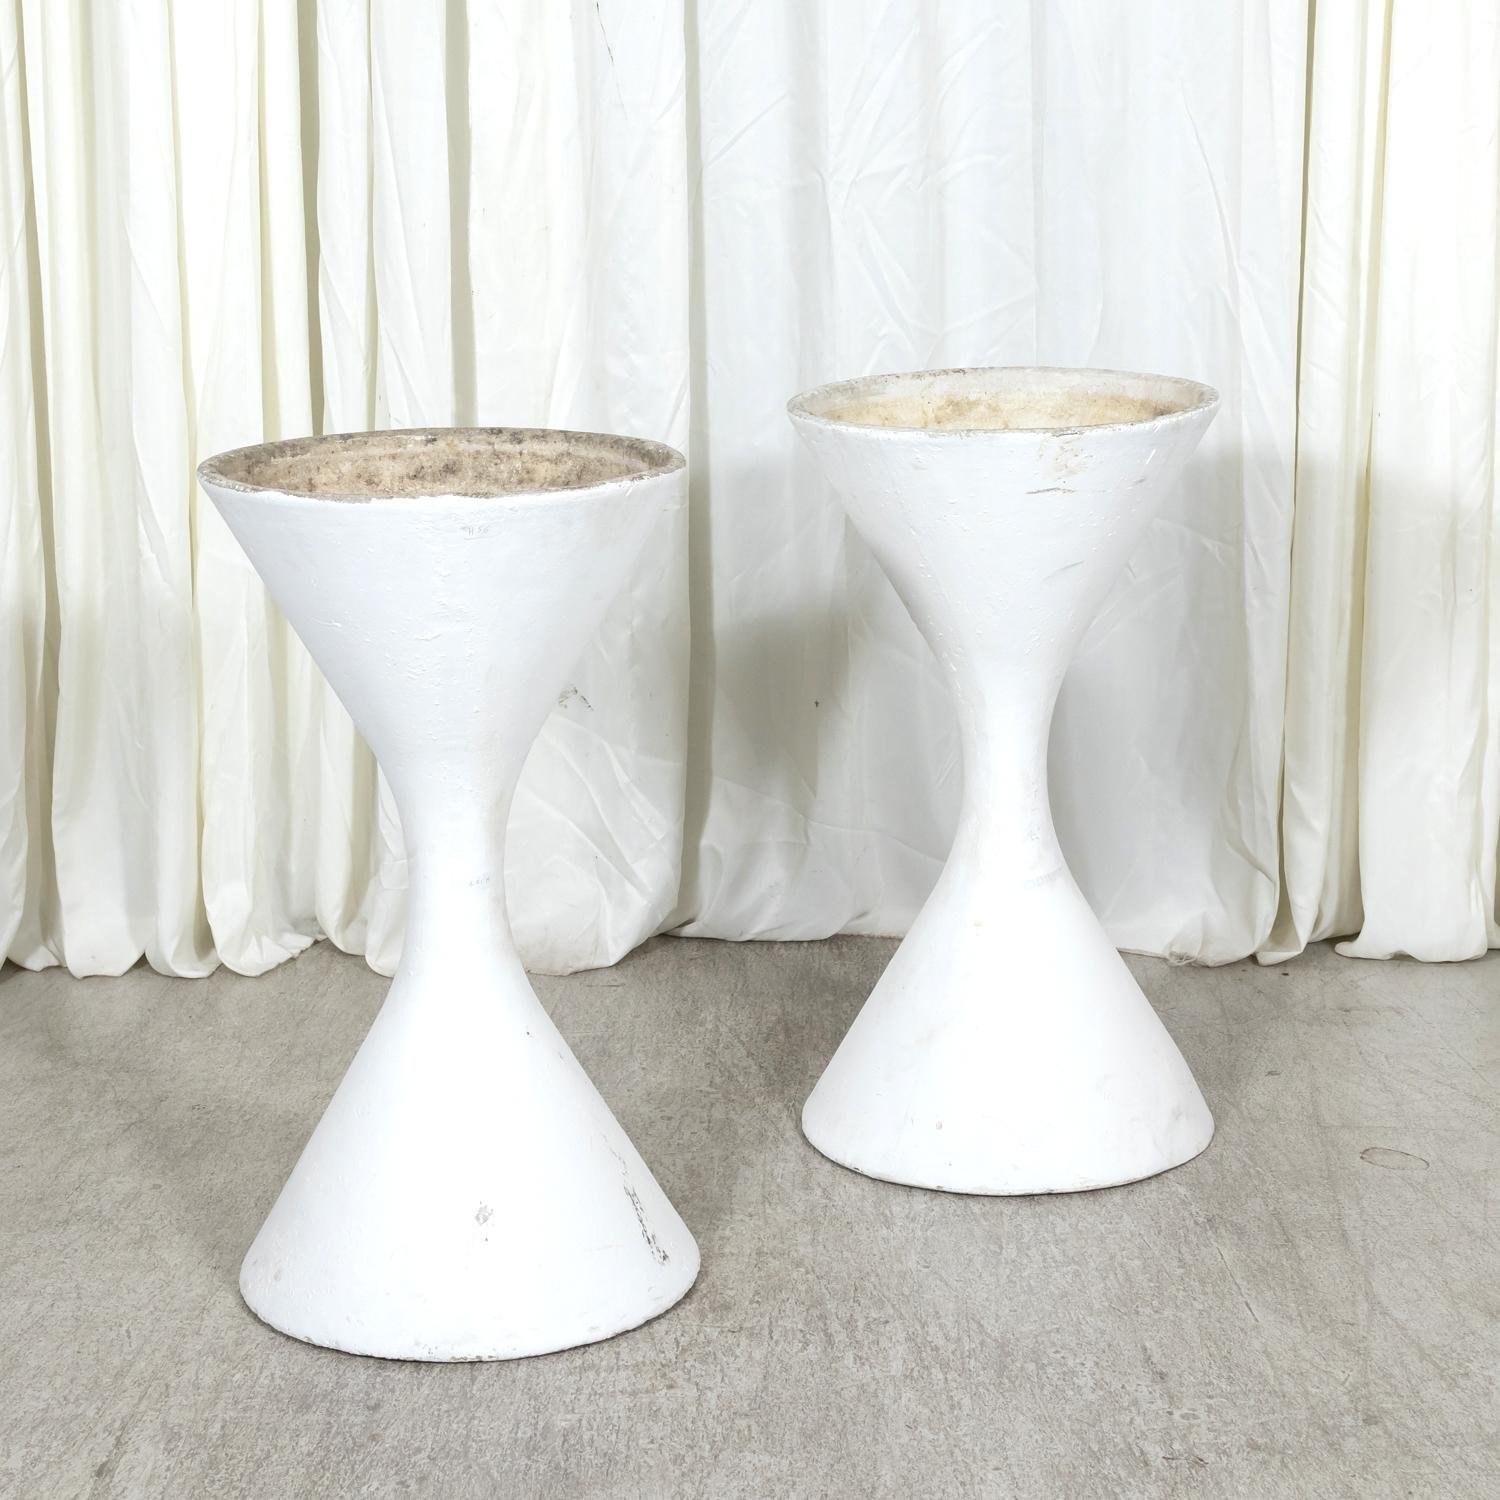 A pair of X-large Mid-Century Modern Diabolo planters designed by Swiss architect Willy Guhl for Eternit, circa 1960s. Originally made in three sizes, this pair is the X-large size at 37 inches tall. Solid and hefty, these iconic sculptural